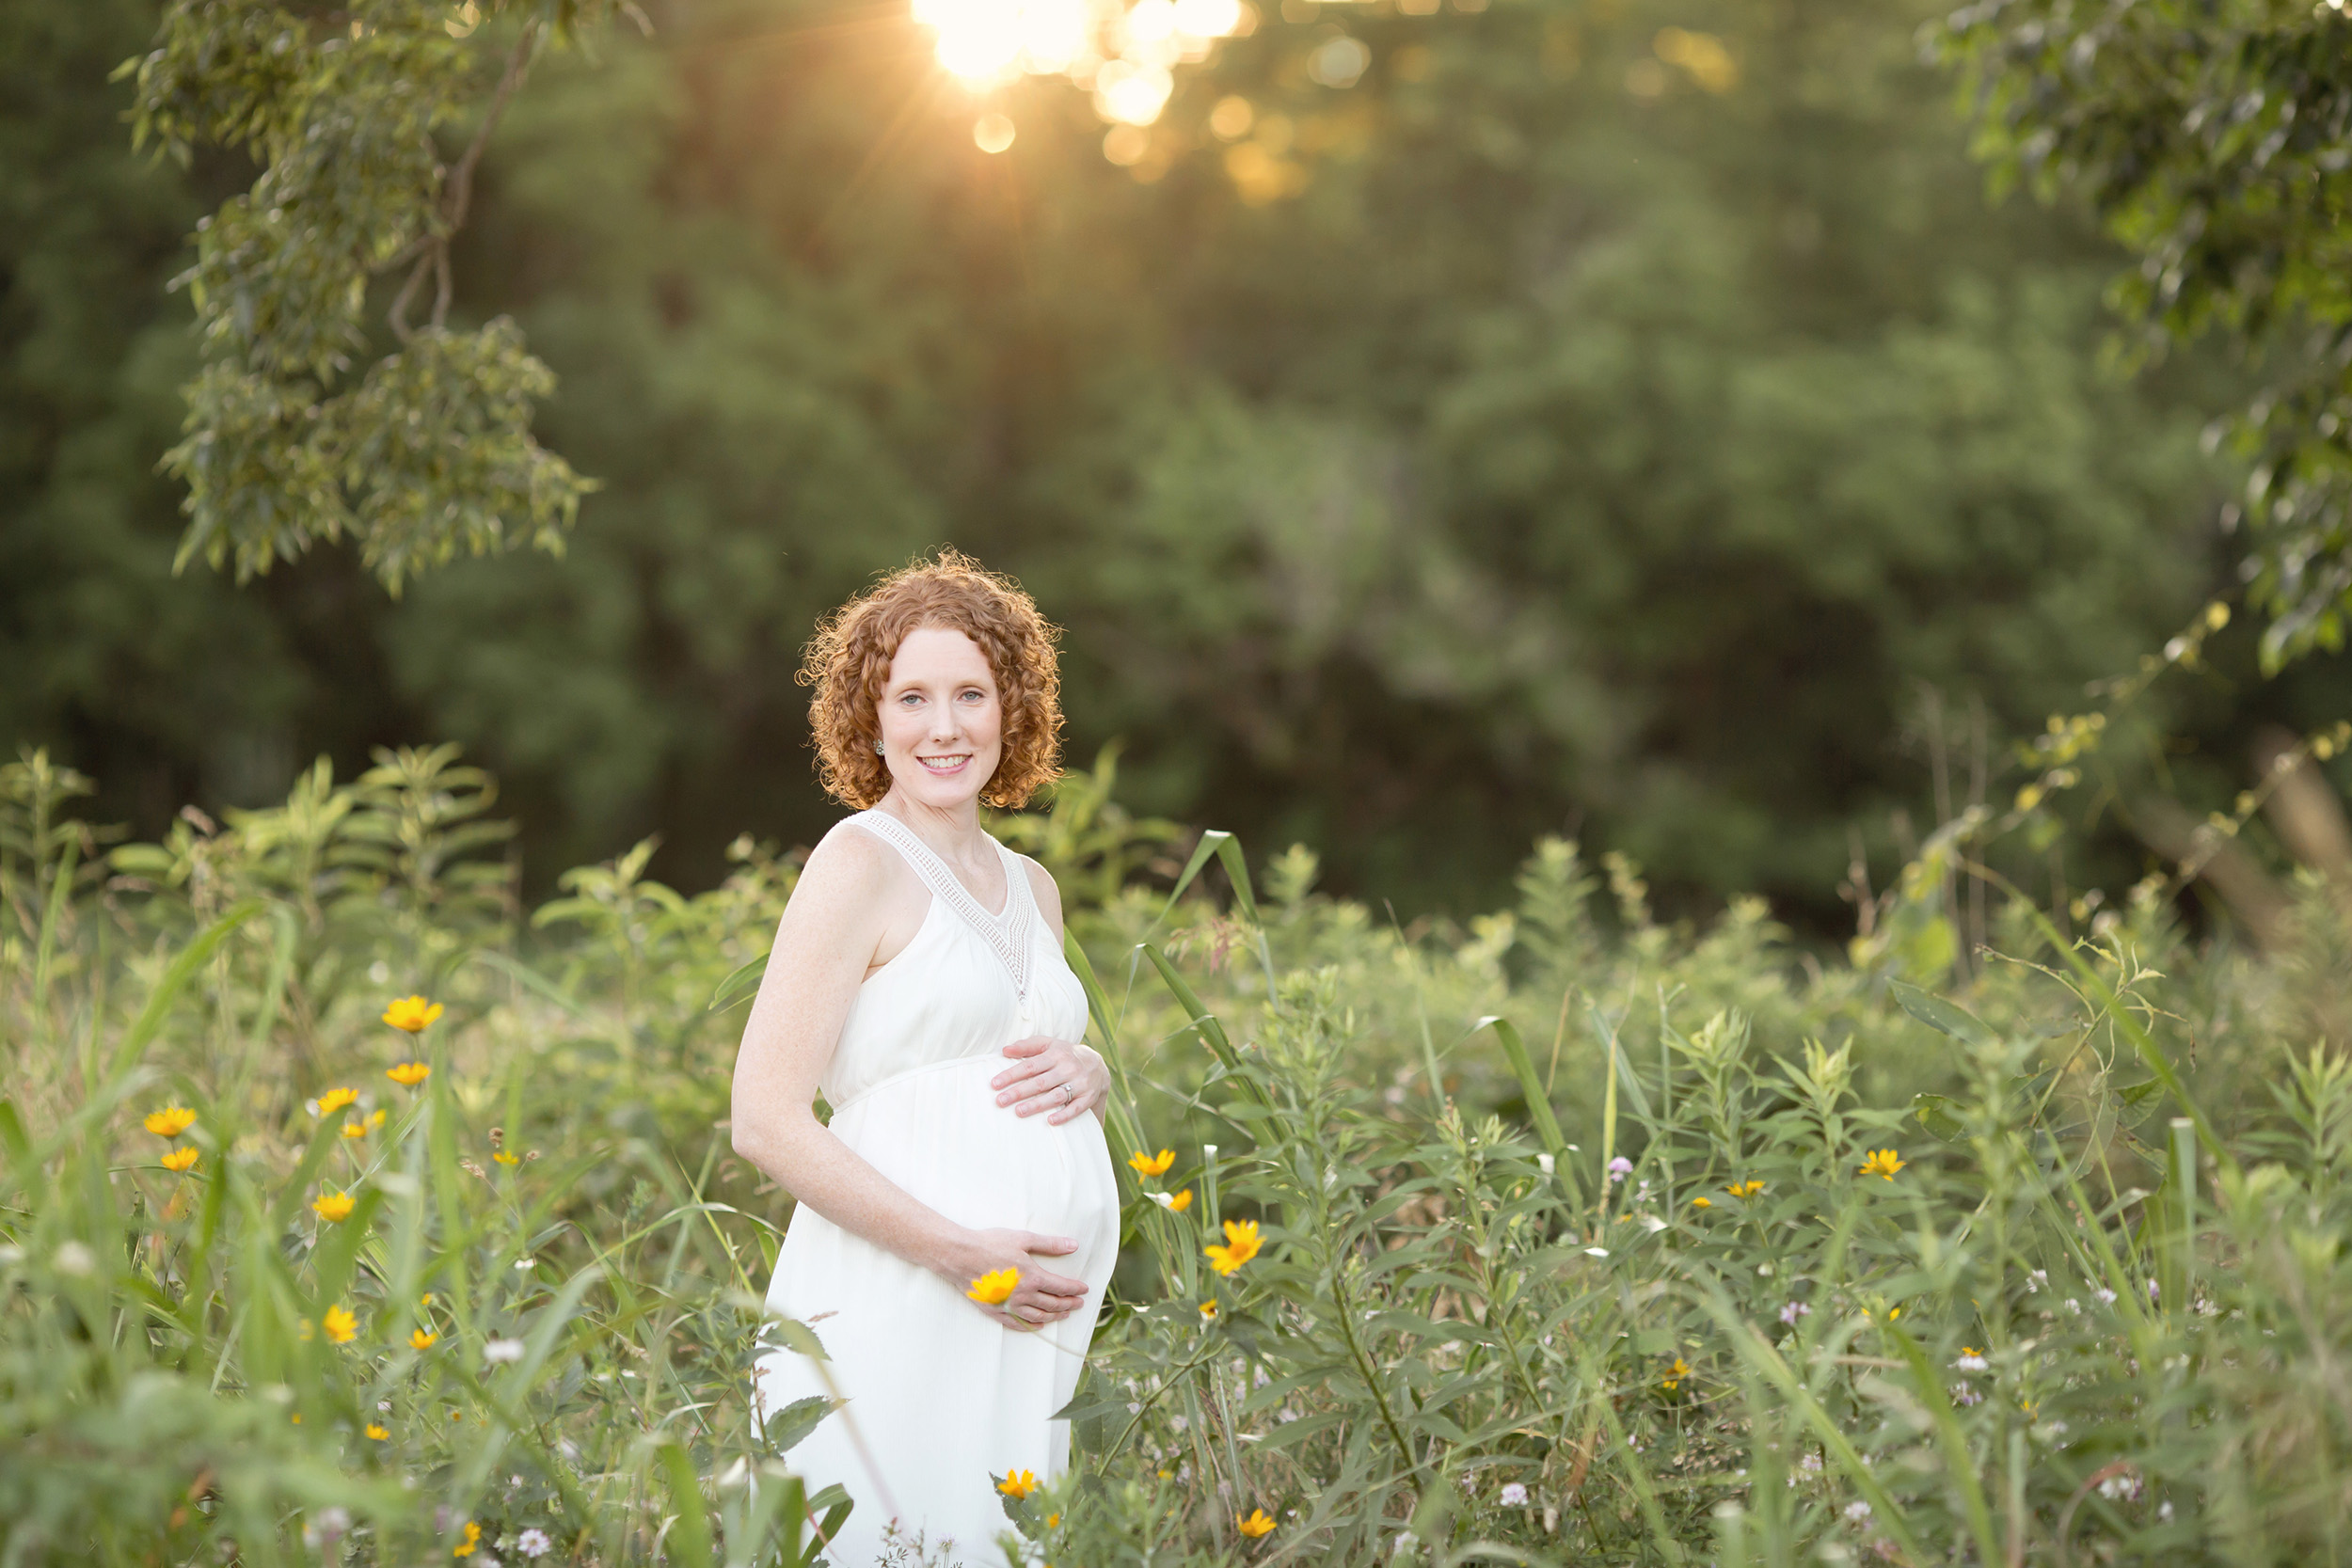 louisville ky maternity photographer | julie brock photography | lousiville ky newborn baby photographer | outdoor field maternity session in louisville ky